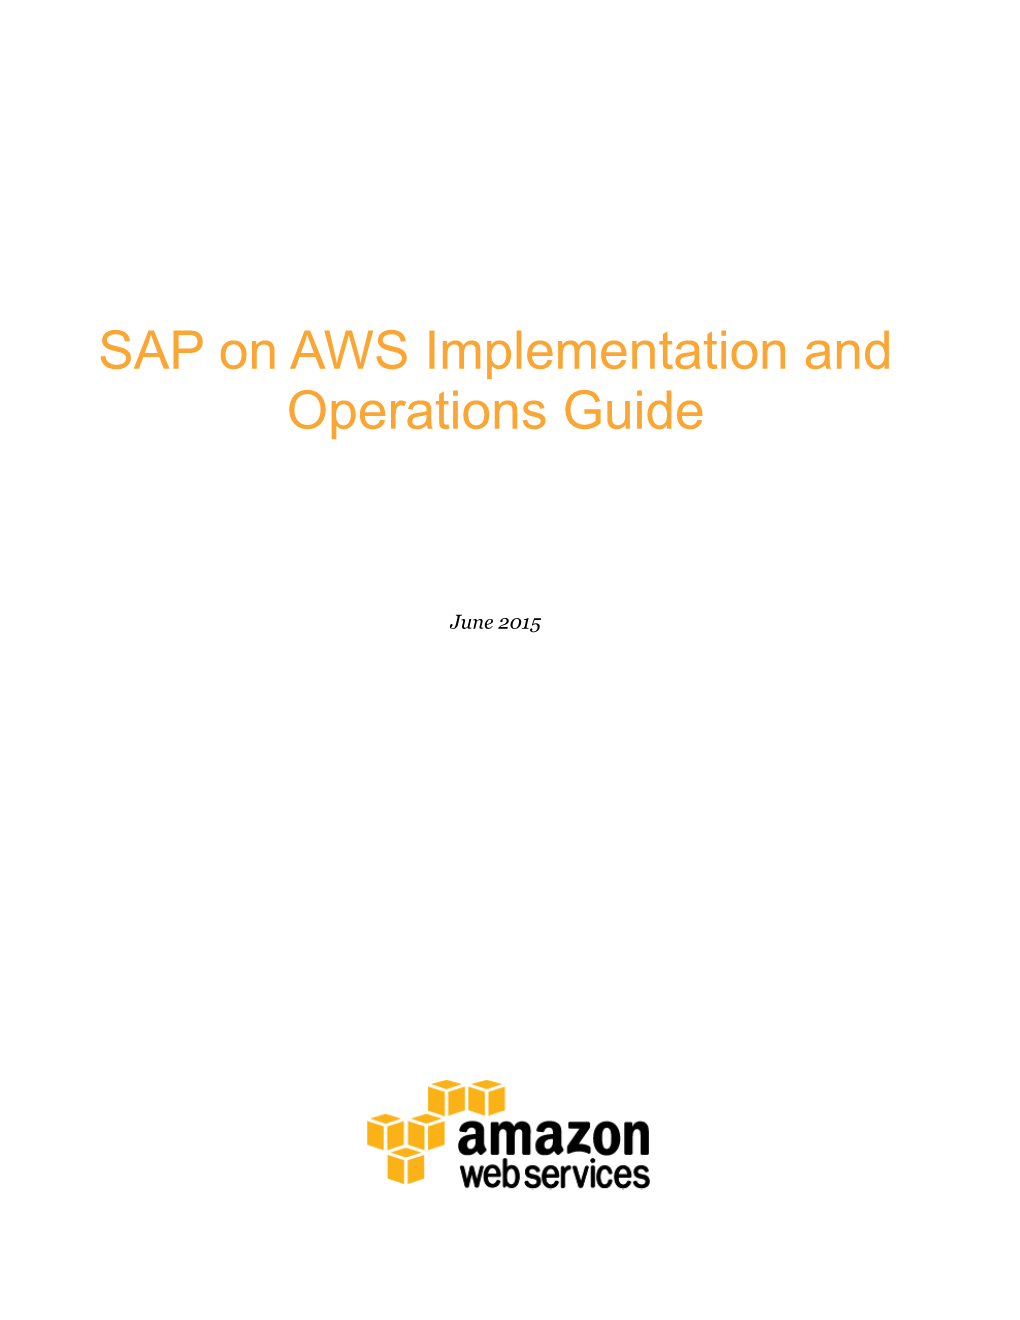 SAP on AWS Implementation and Operations Guide